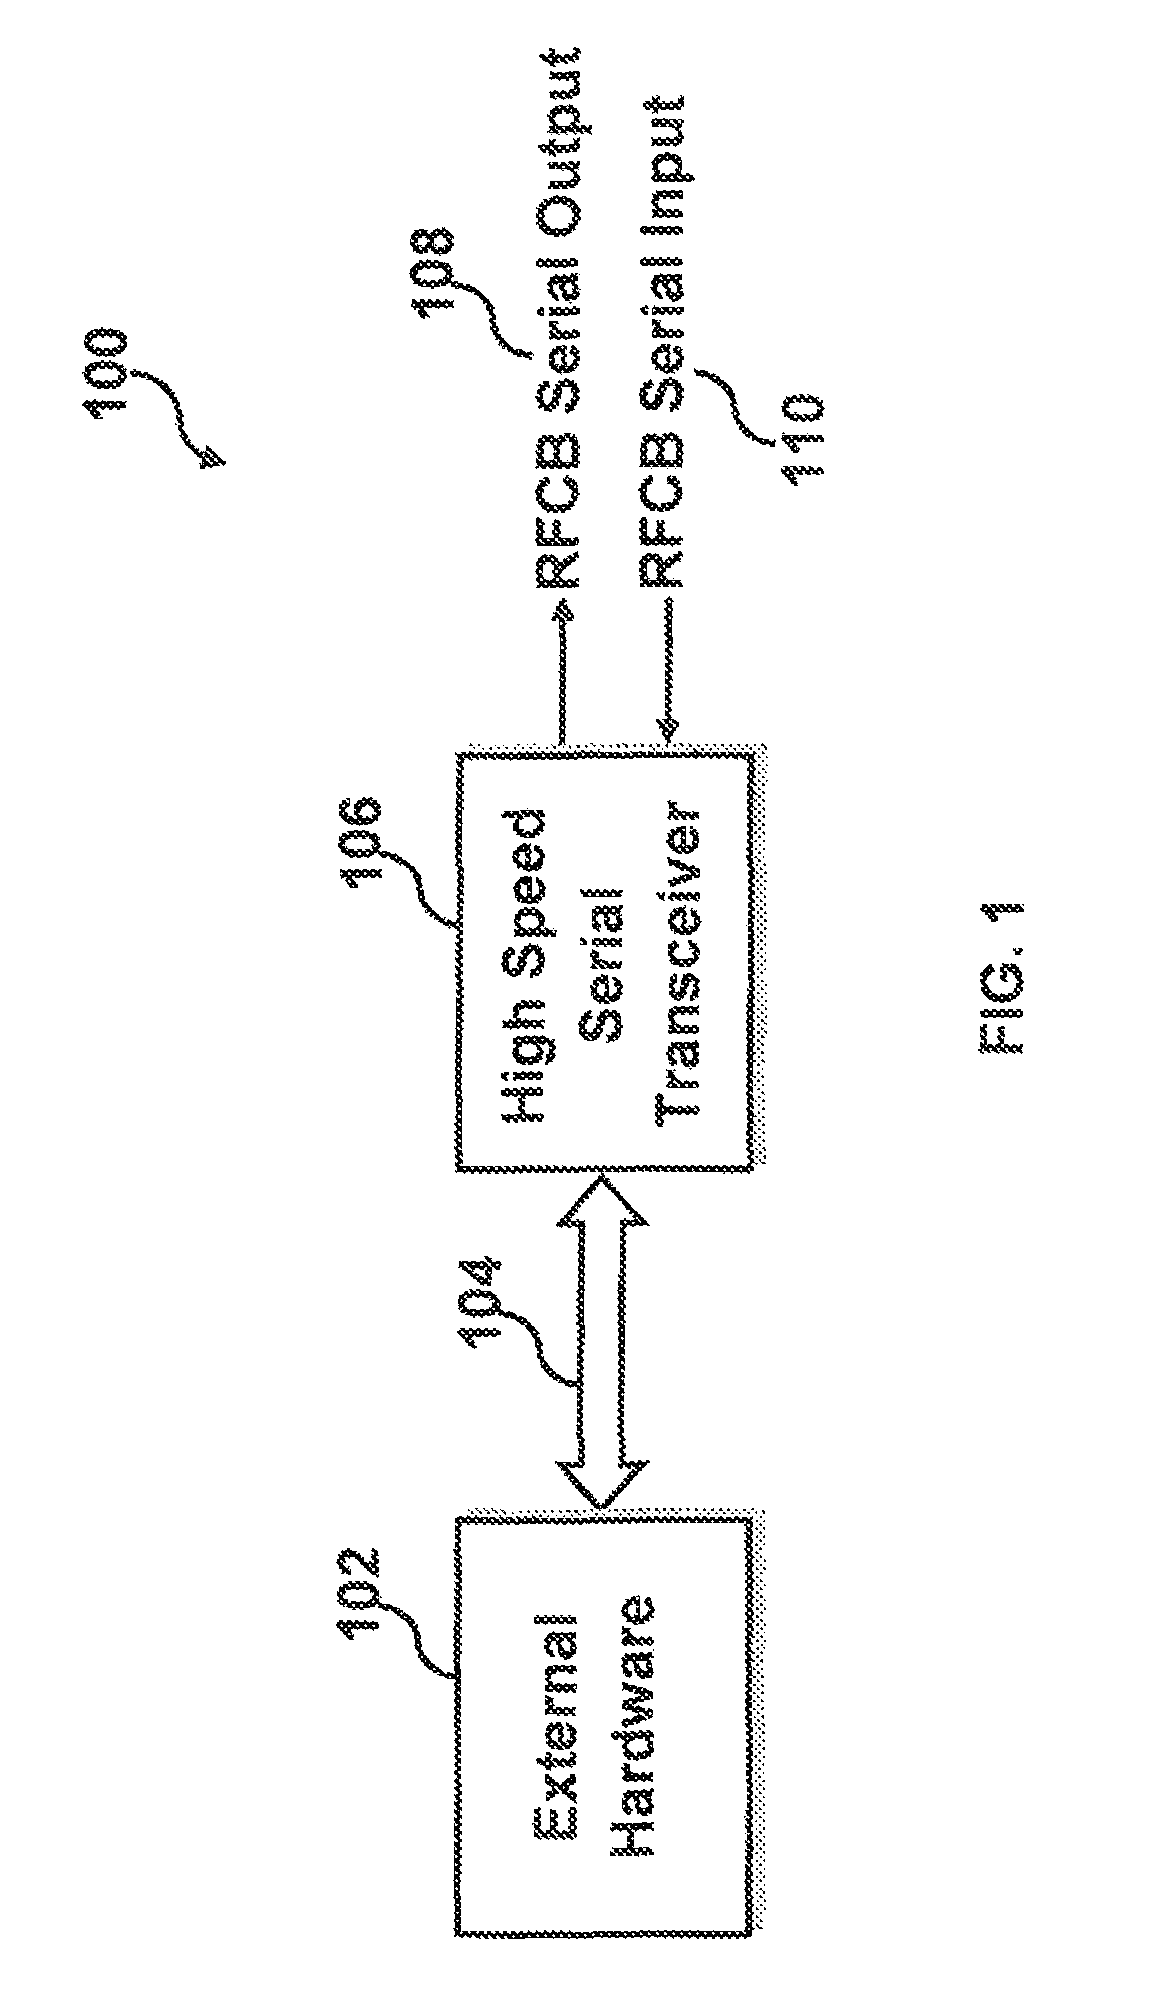 Method for emulating low frequency serial clock data recovery RF control bus operation using high frequency data